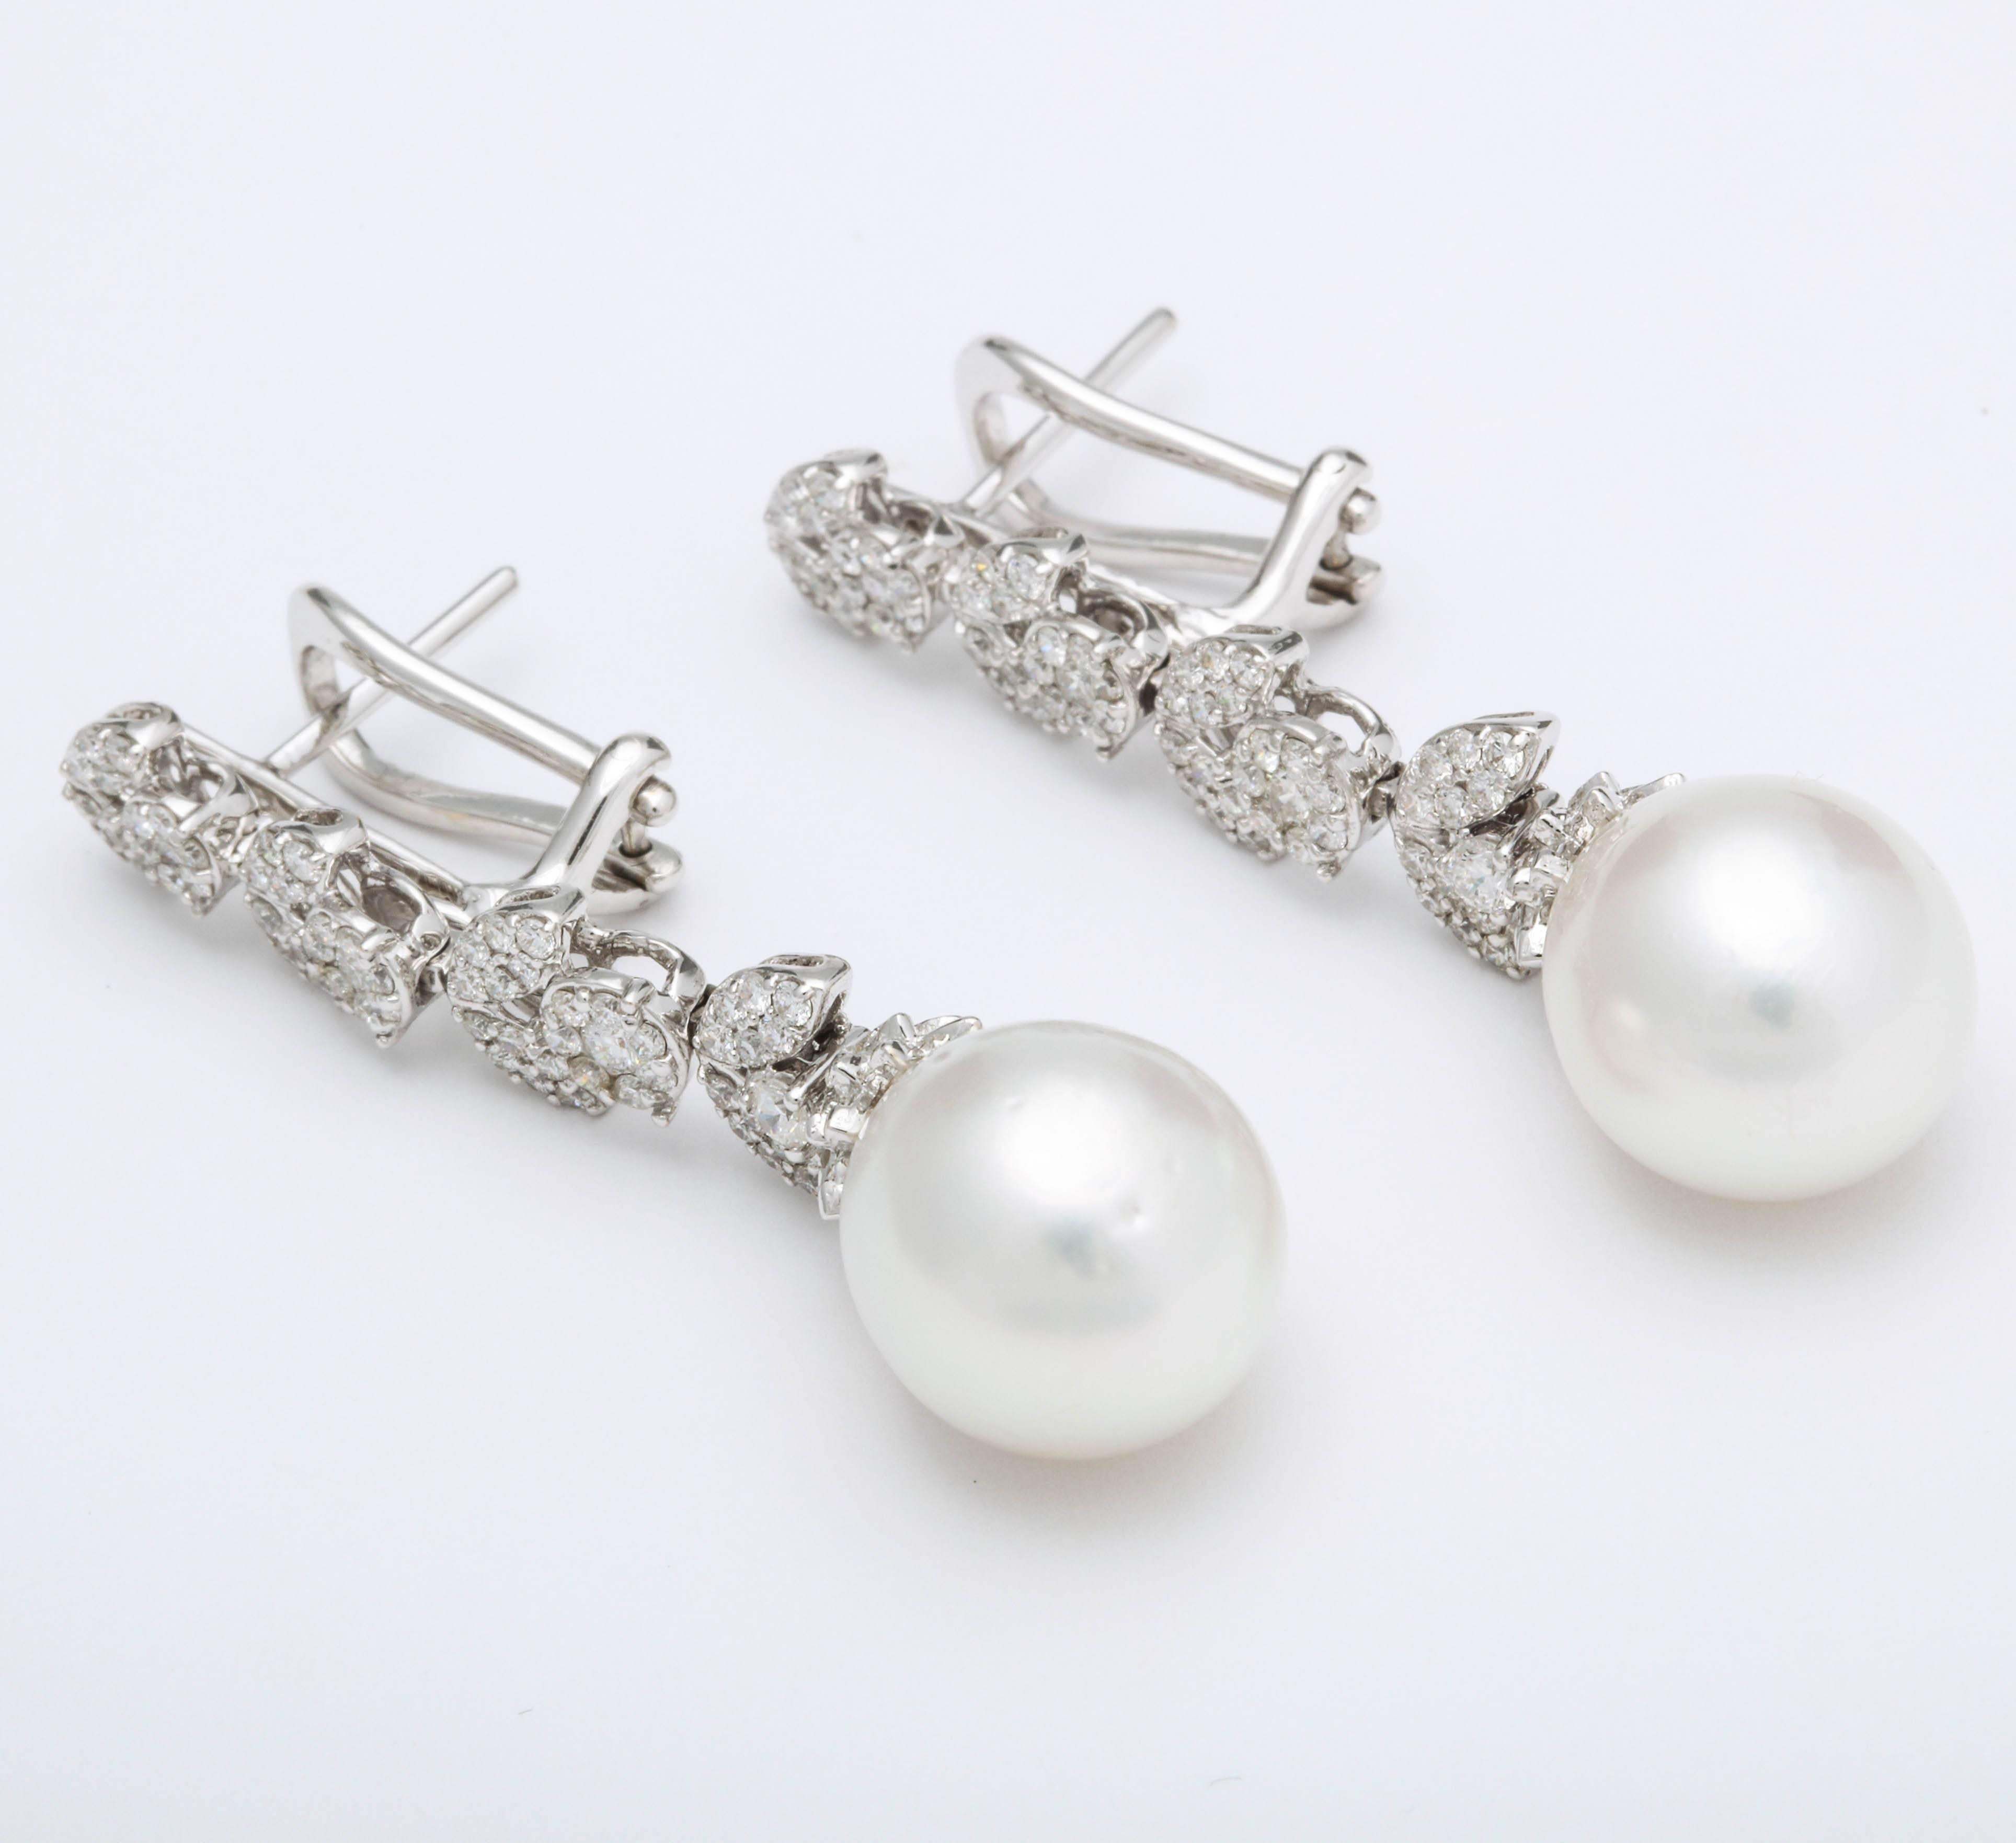 
An elegant pair of pearl and diamond dangle earrings. 

1.50 carats of white round brilliant cut diamonds set into round and marquise shapes with a pearl drop.

18k white gold 

Approximately 1.6 inches long

A timeless pair of earrings!